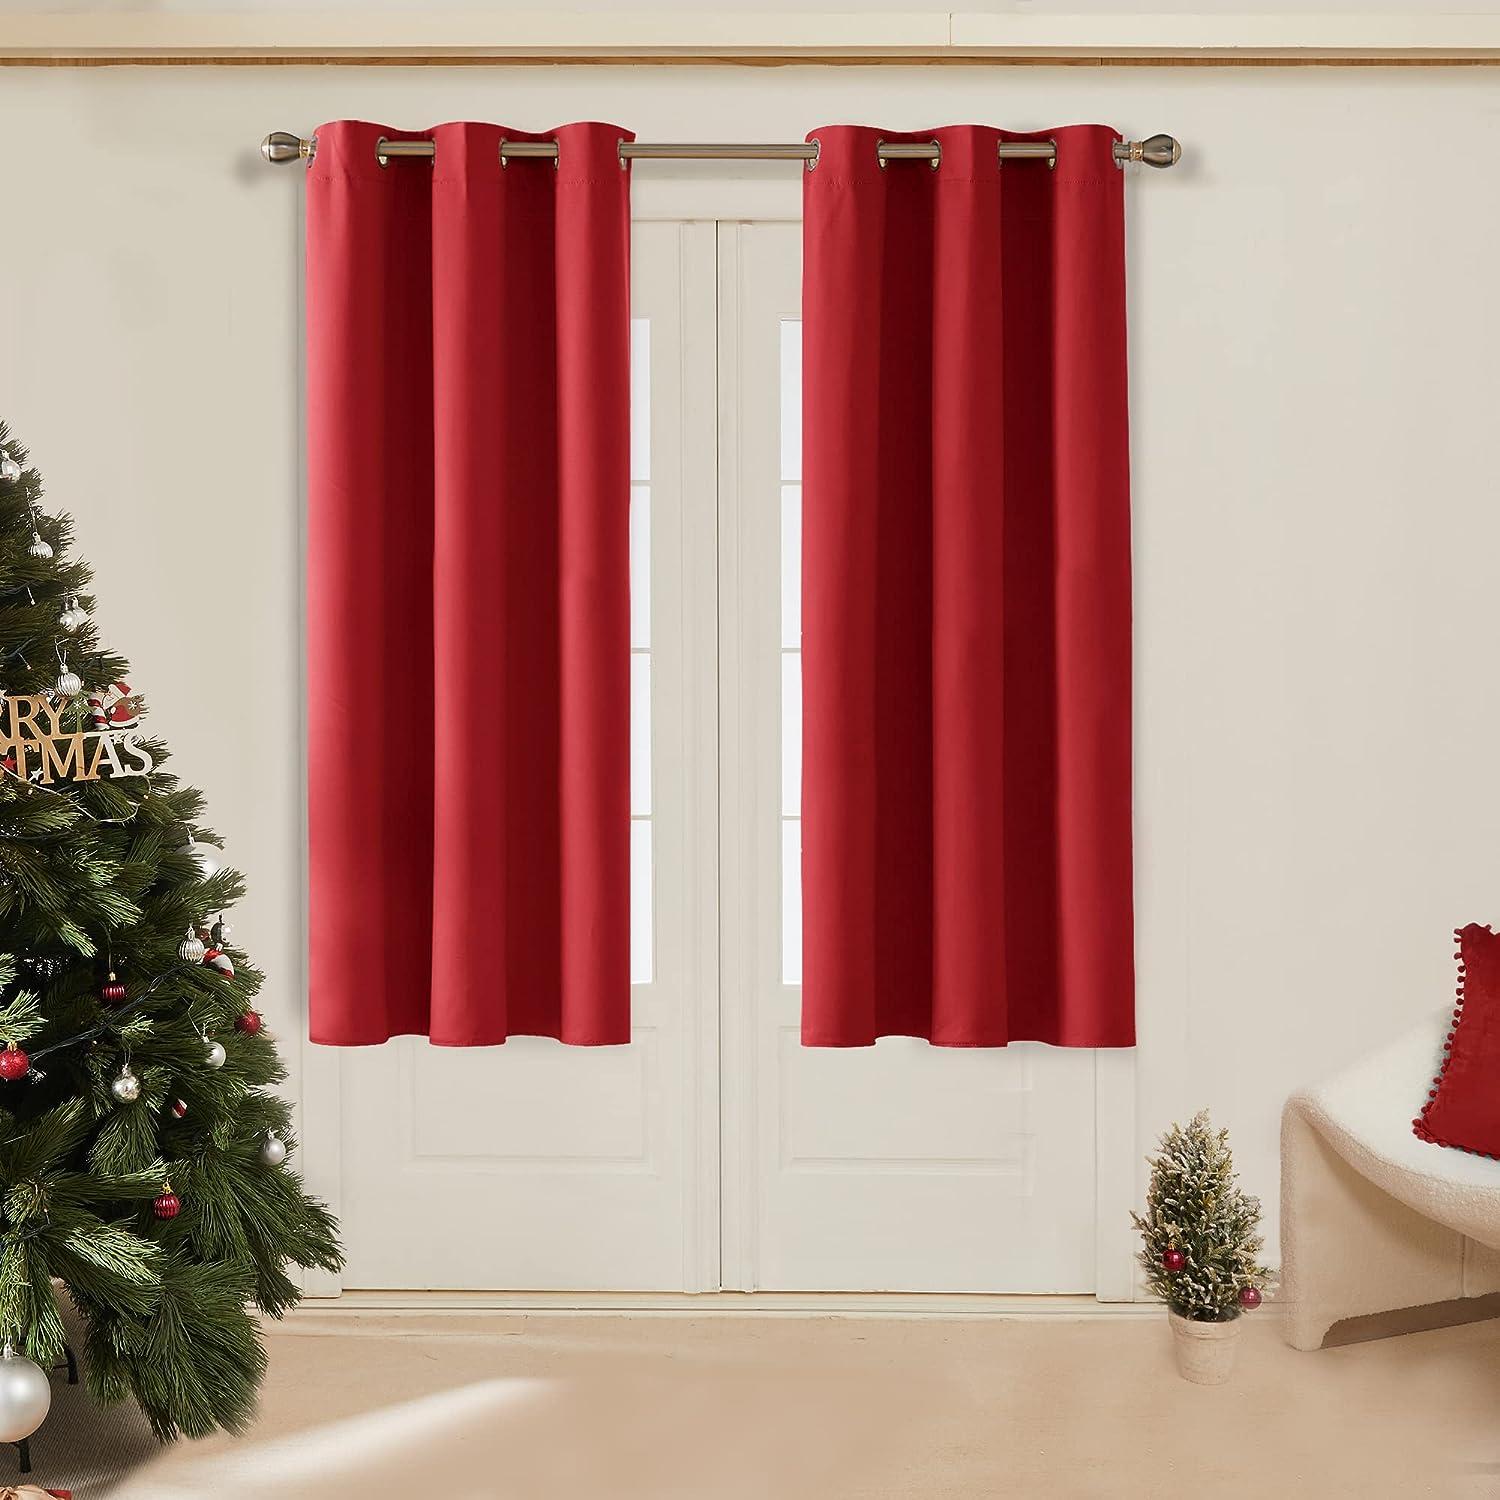 Deconovo Double Layer Thermal Insulated Blackout Curtains for $9.04